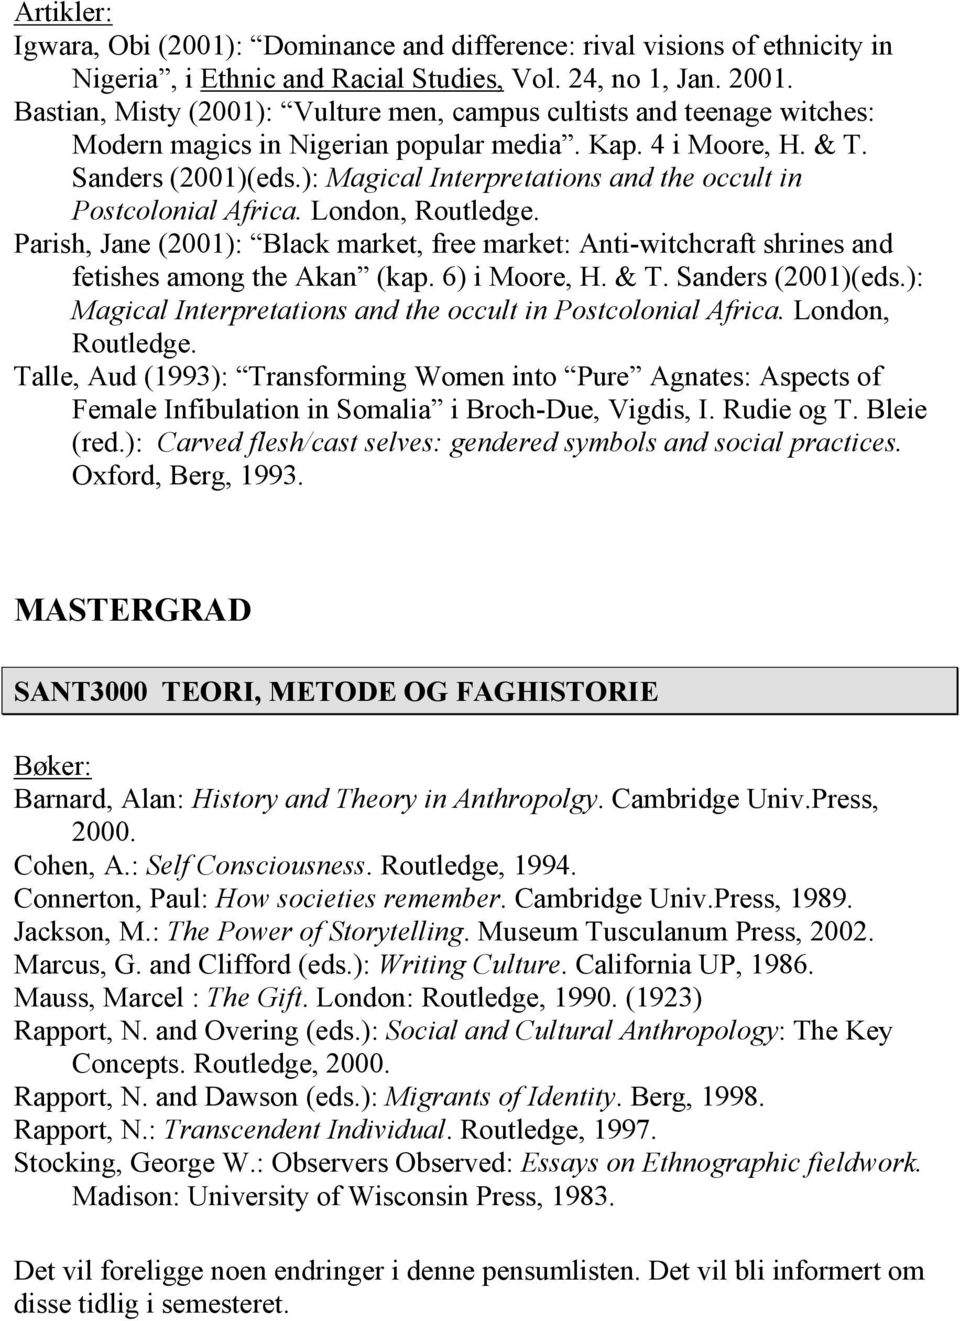 ): Magical Interpretations and the occult in Postcolonial Africa. London, Routledge. Parish, Jane (2001): Black market, free market: Anti-witchcraft shrines and fetishes among the Akan (kap.